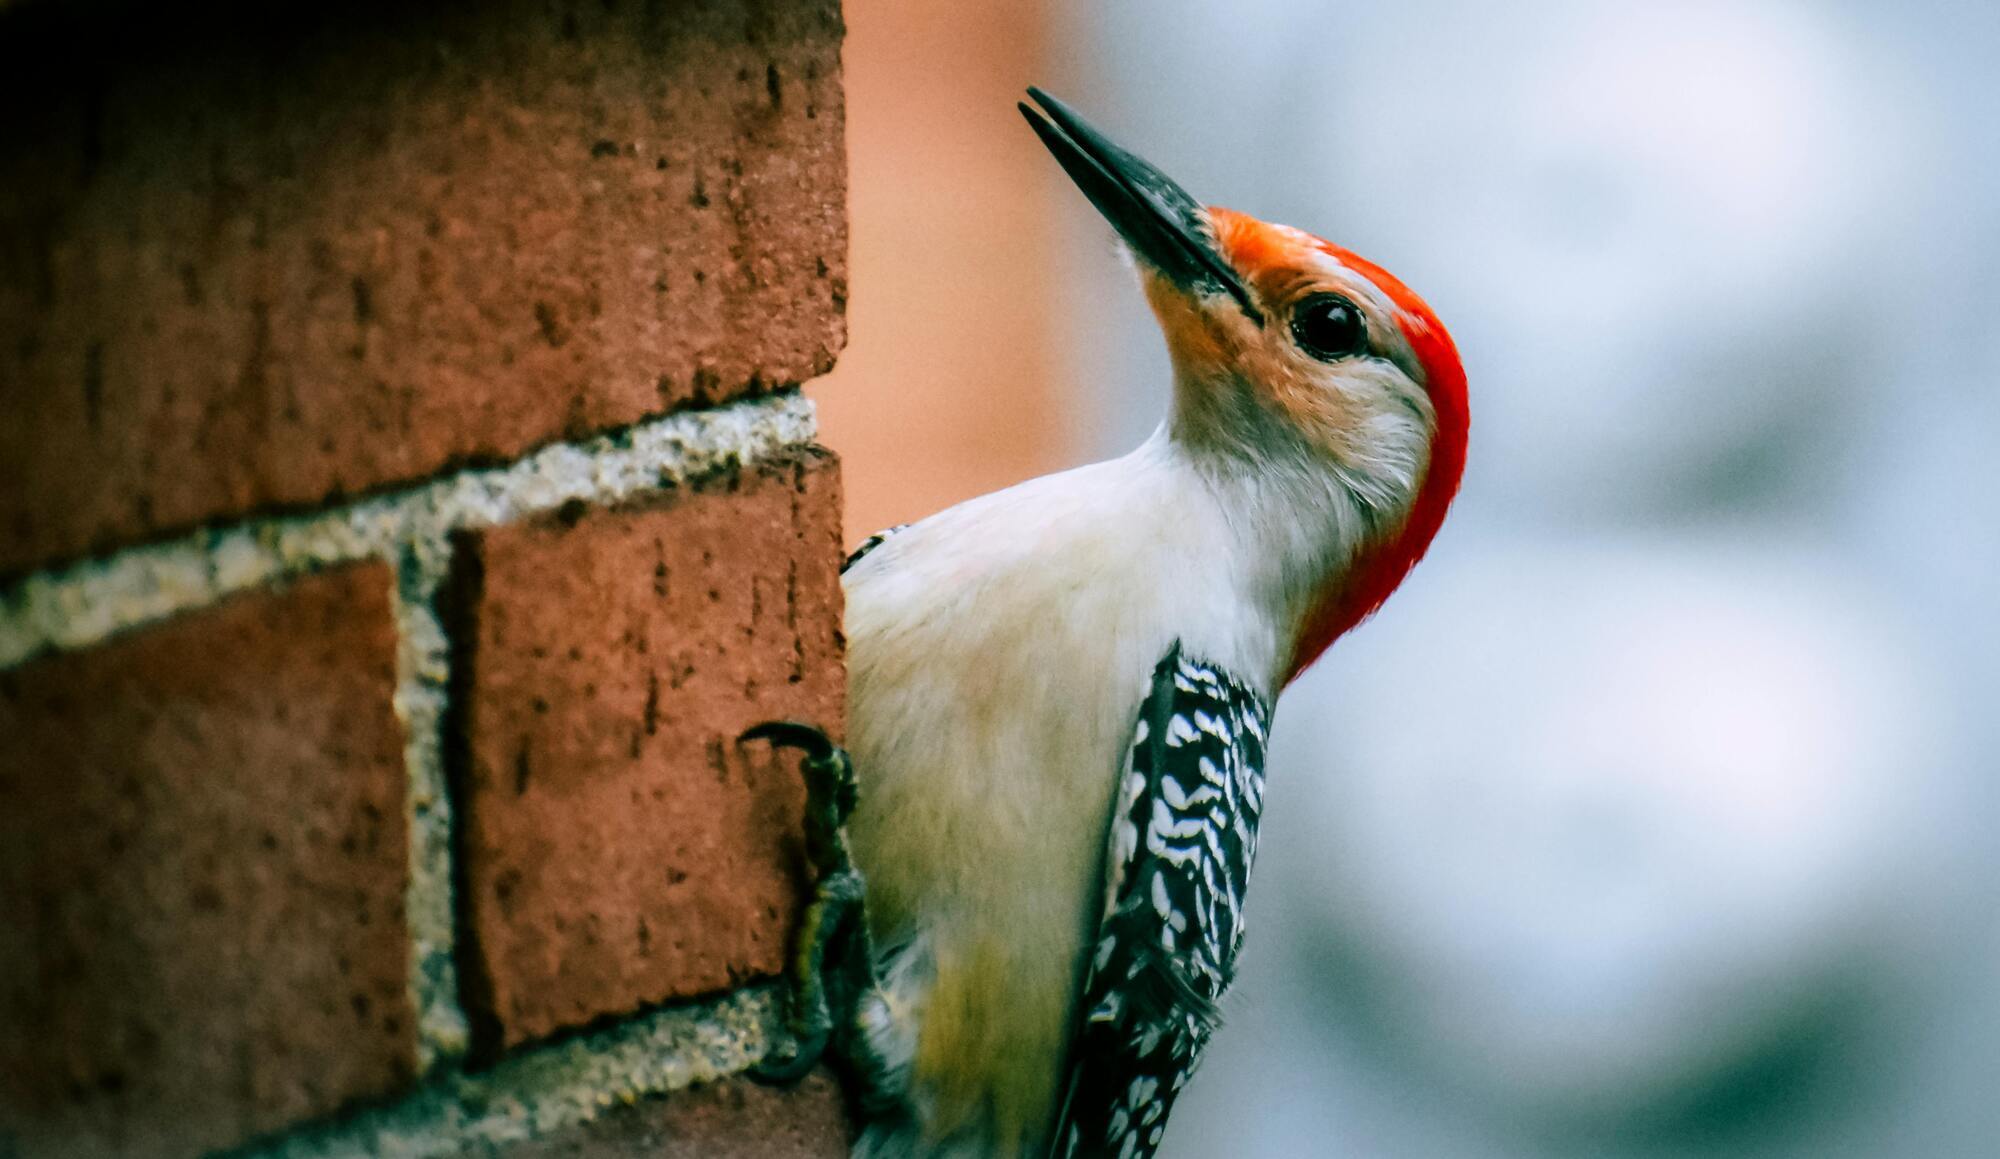 The woodpecker is the spirit animal of Cancer